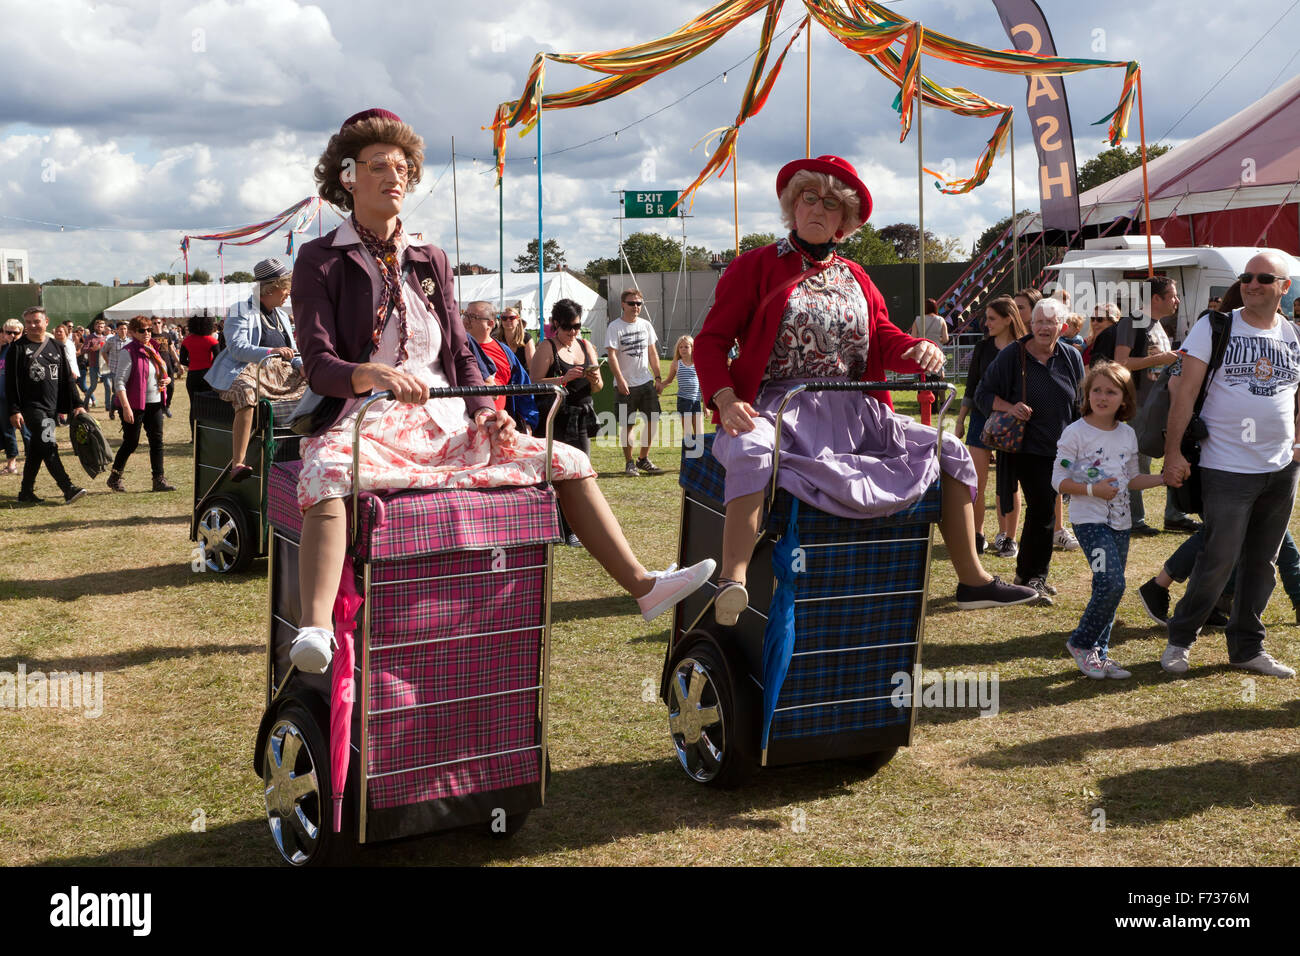 Men, dressed up as old women, riding about on giant motorized  shopping trollies, at the On Blackheath Music Festival, 2015. Stock Photo